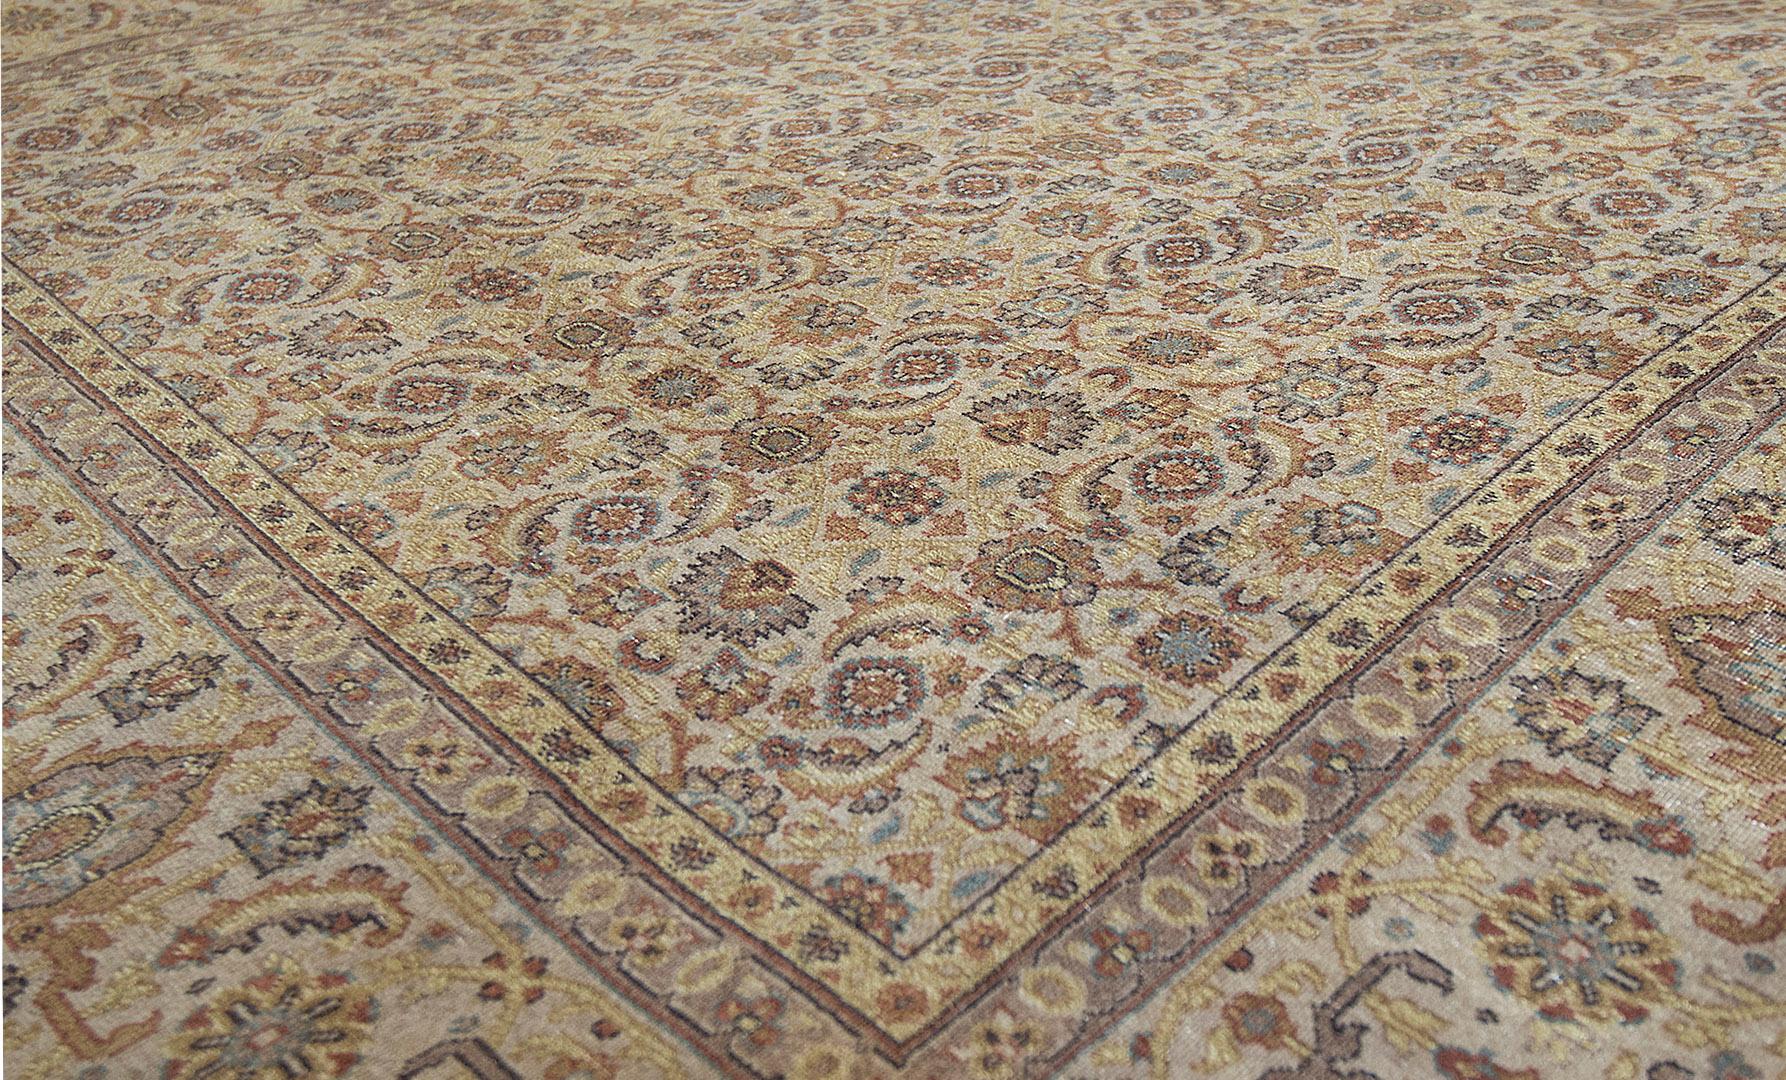 Genuine Handwoven Tabriz Rug In Excellent Condition For Sale In West Hollywood, CA